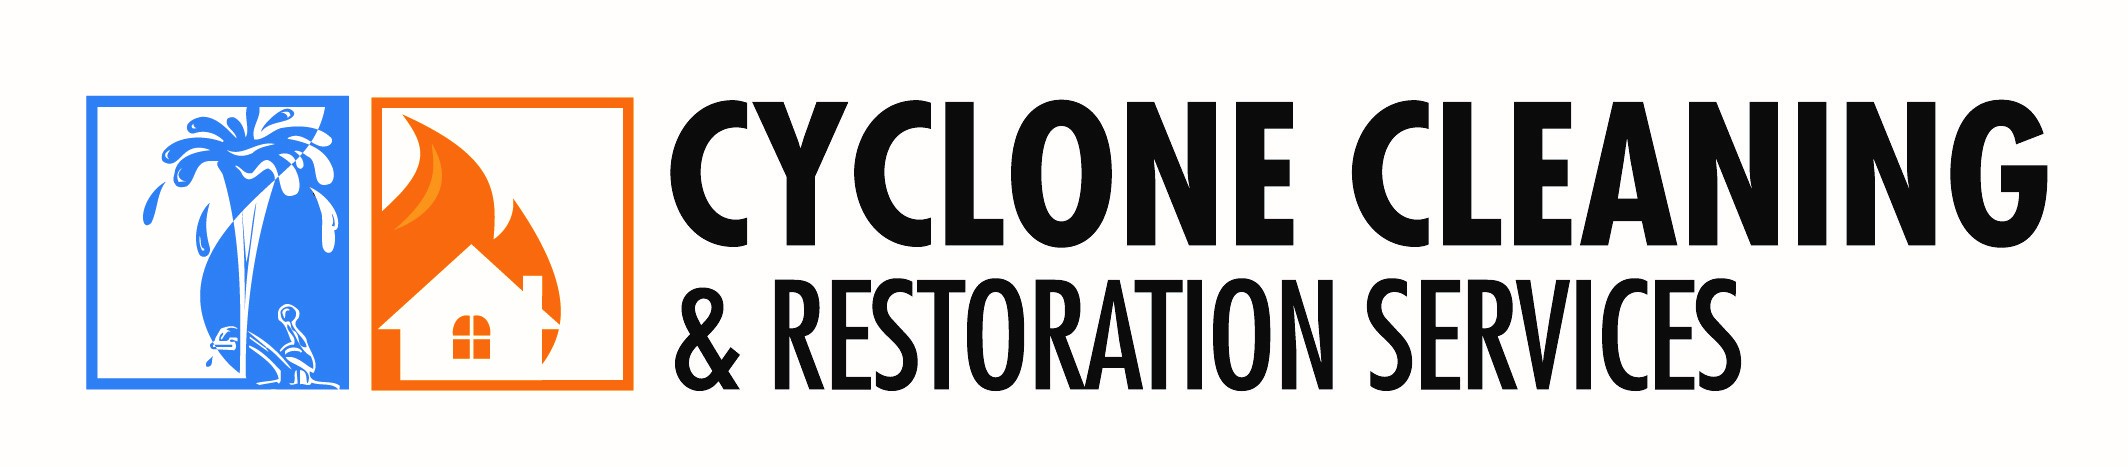 Cyclone Cleaning & Restoration Services